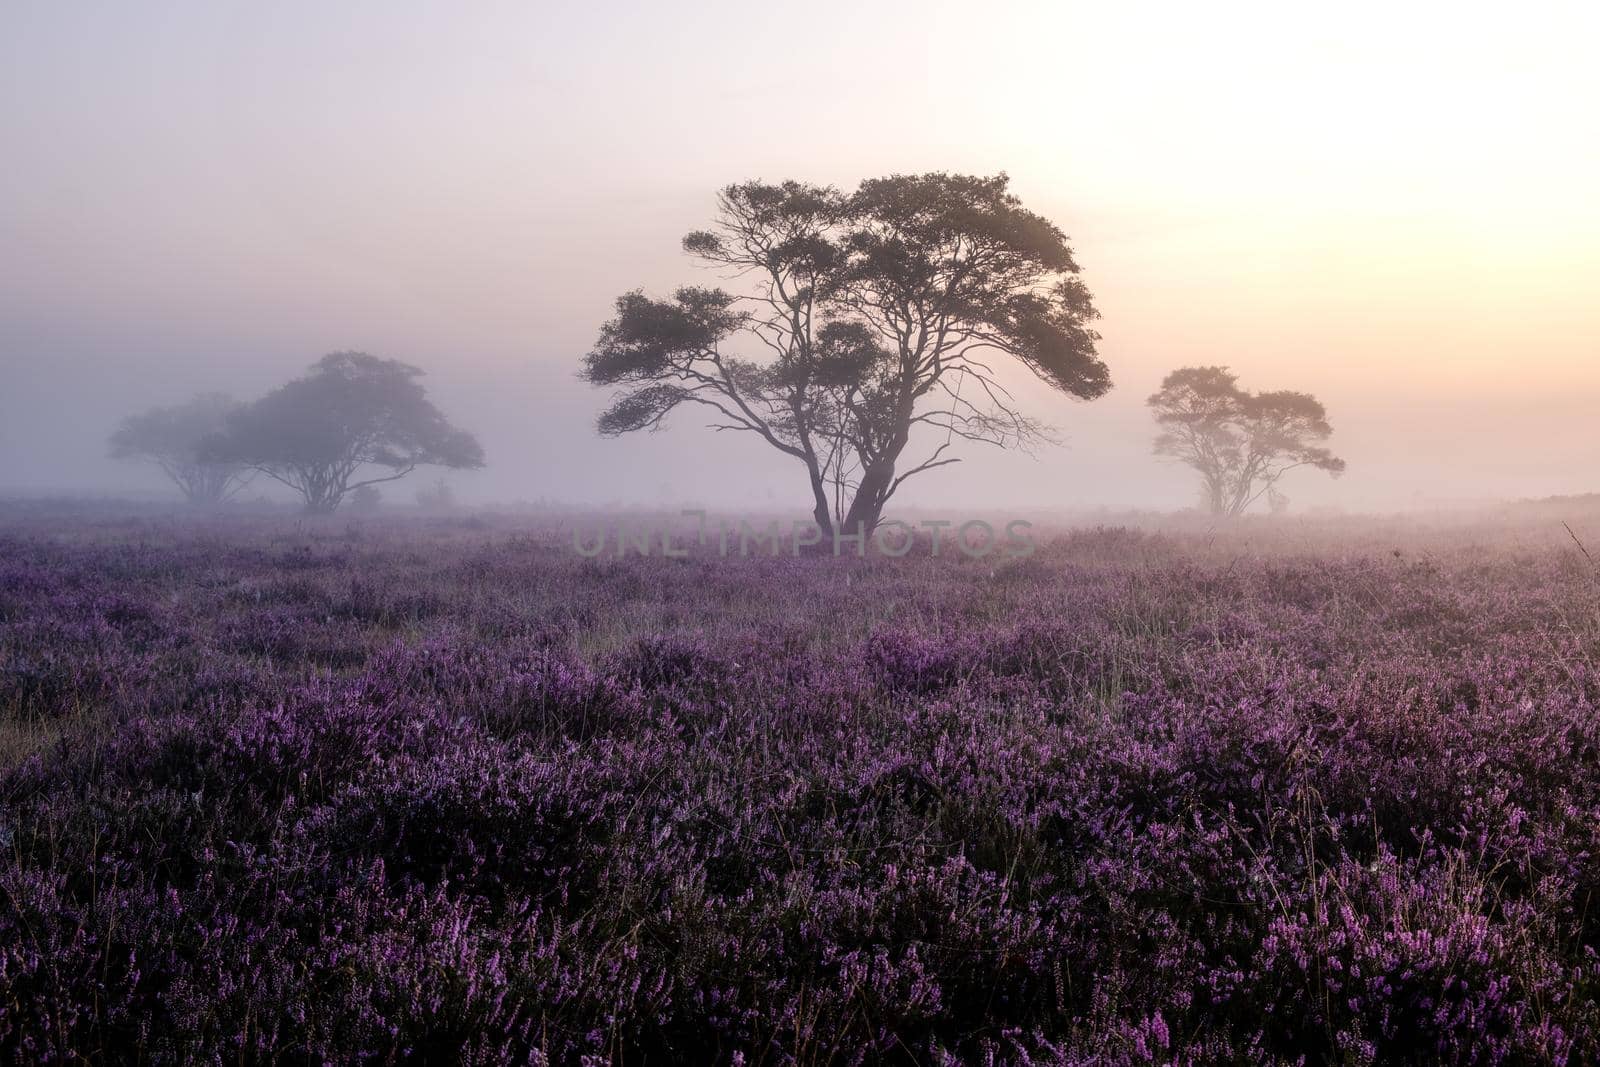 Blooming heather in the Netherlands,Sunny foggy Sunrise over the pink purple hills at Westerheid park Netherlands, blooming Heather fields in the Netherlands during Sunrise . Holland Europe